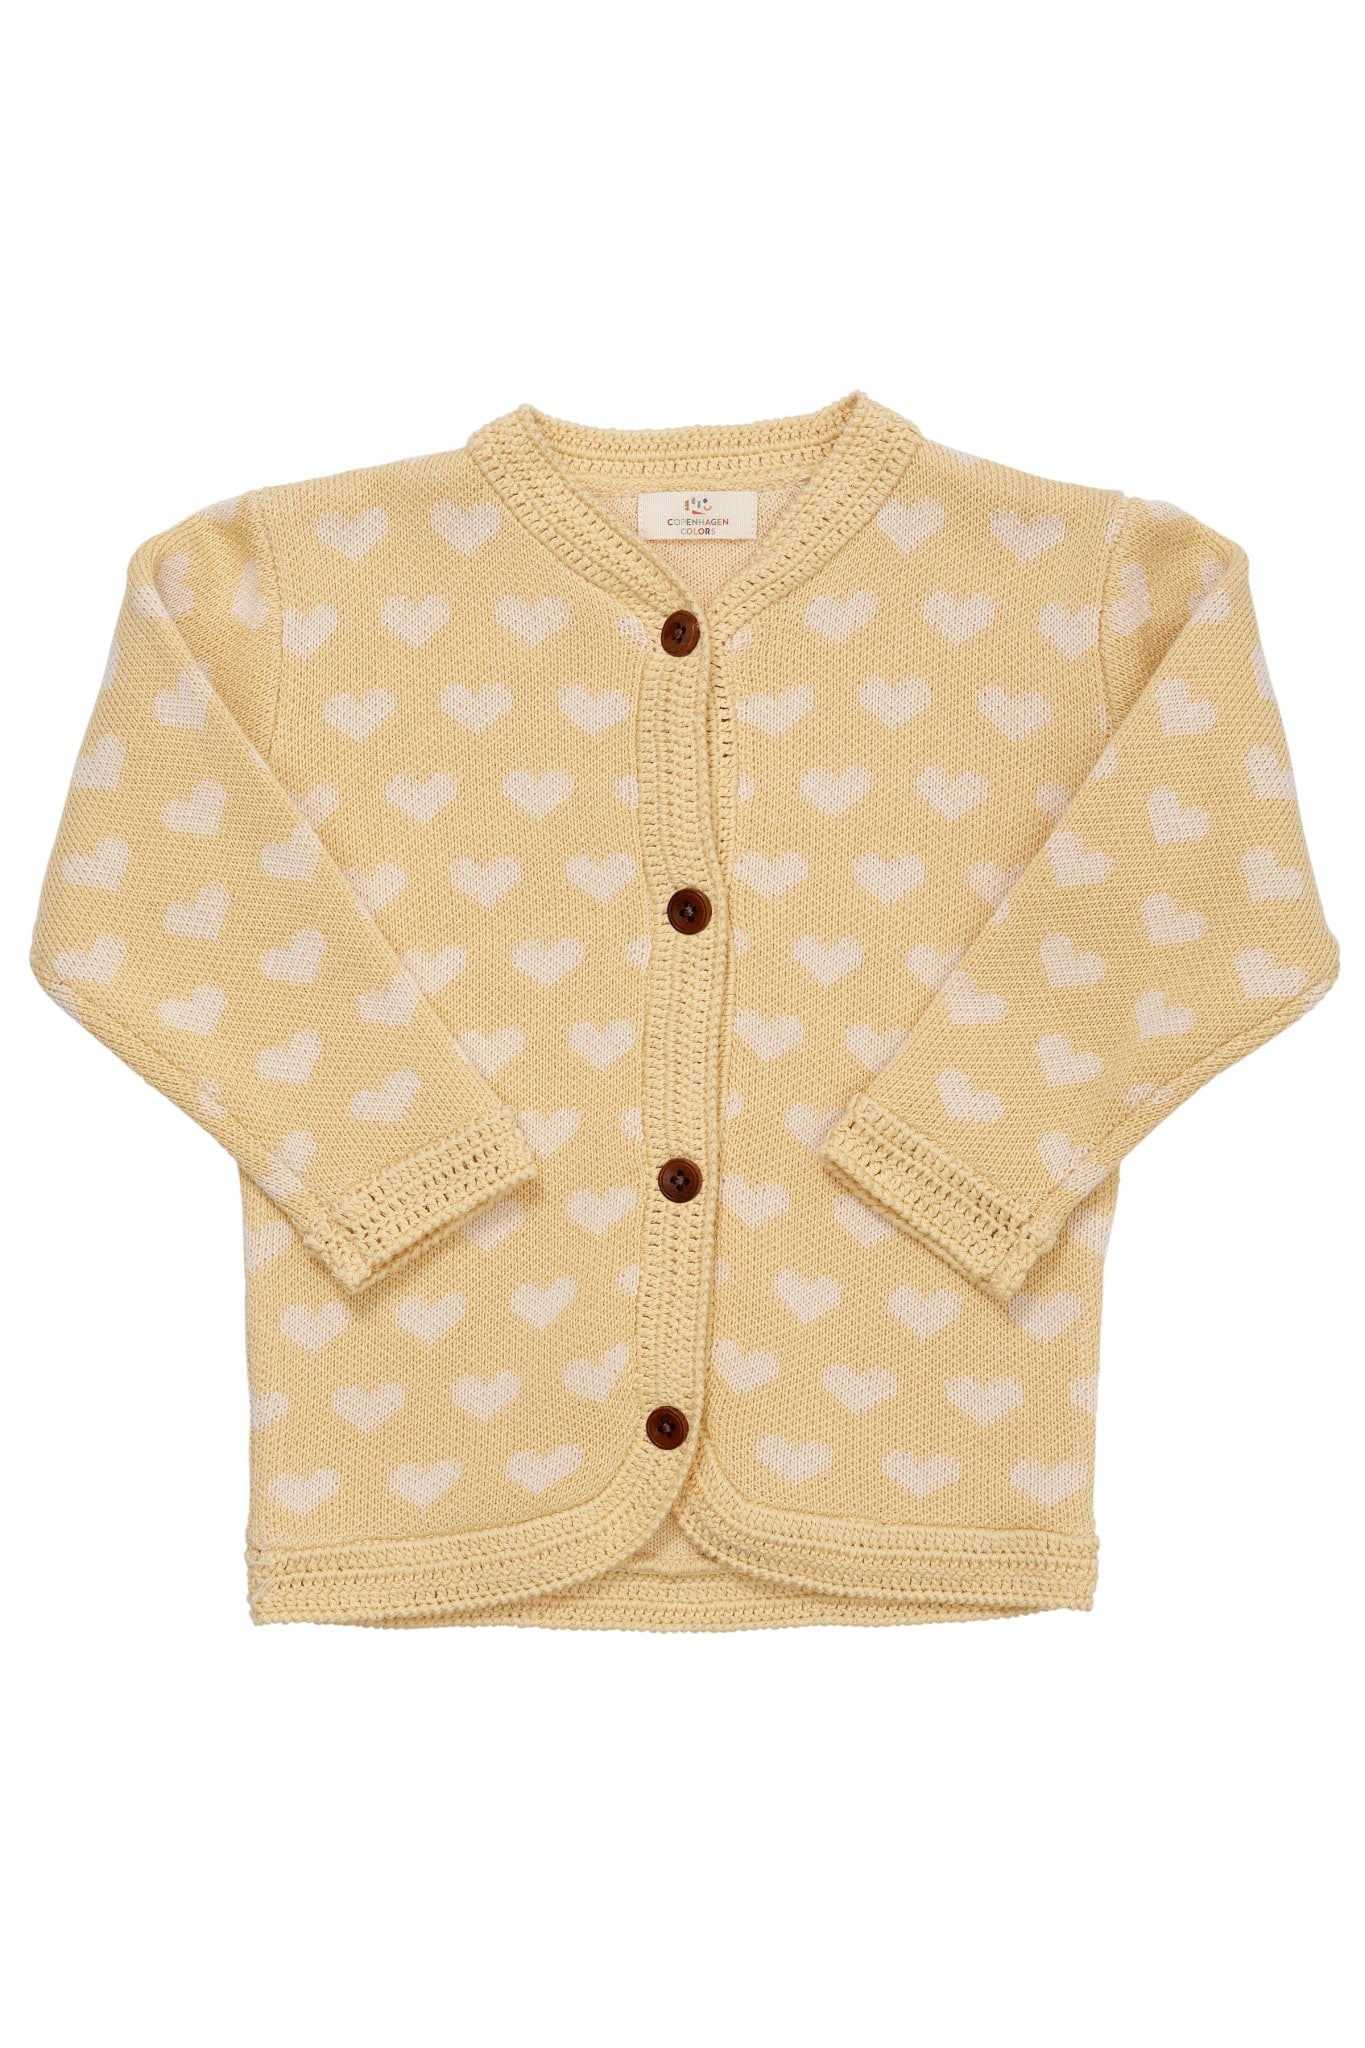 KNITTED CARDIGAN W. HEARTS - PALE YELLOW/CREAM COMB.